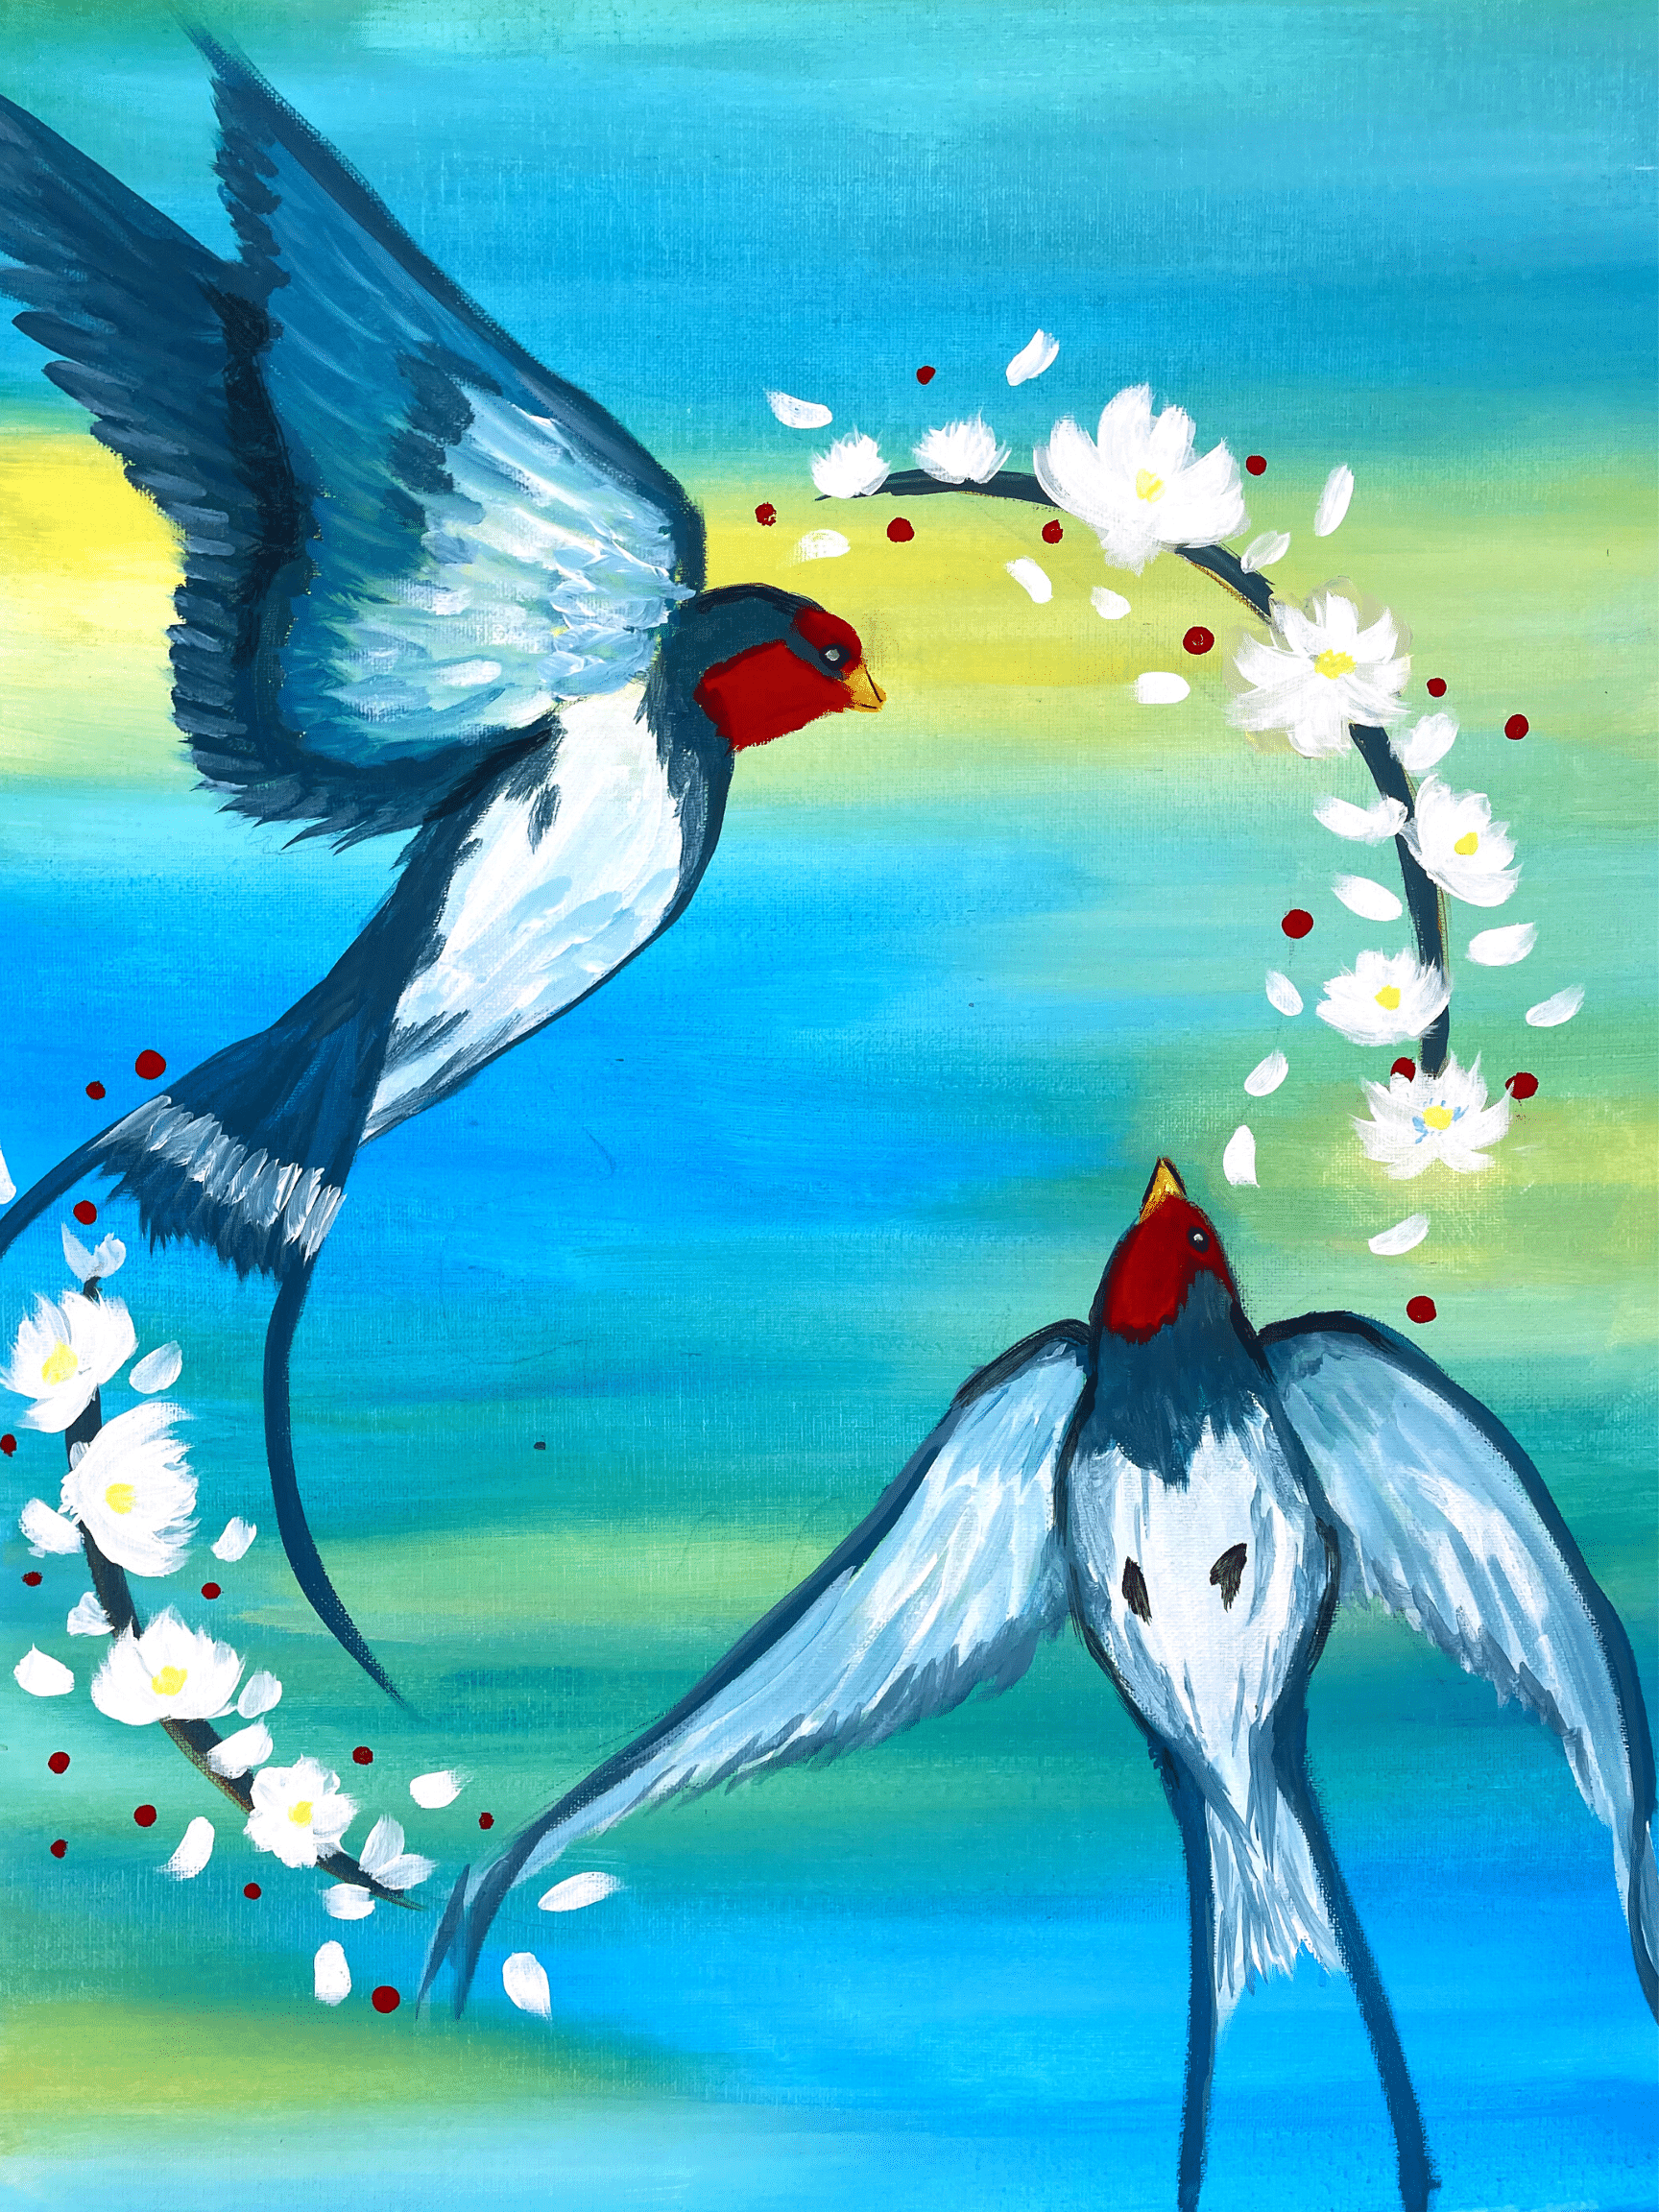 Dance of the Swallows